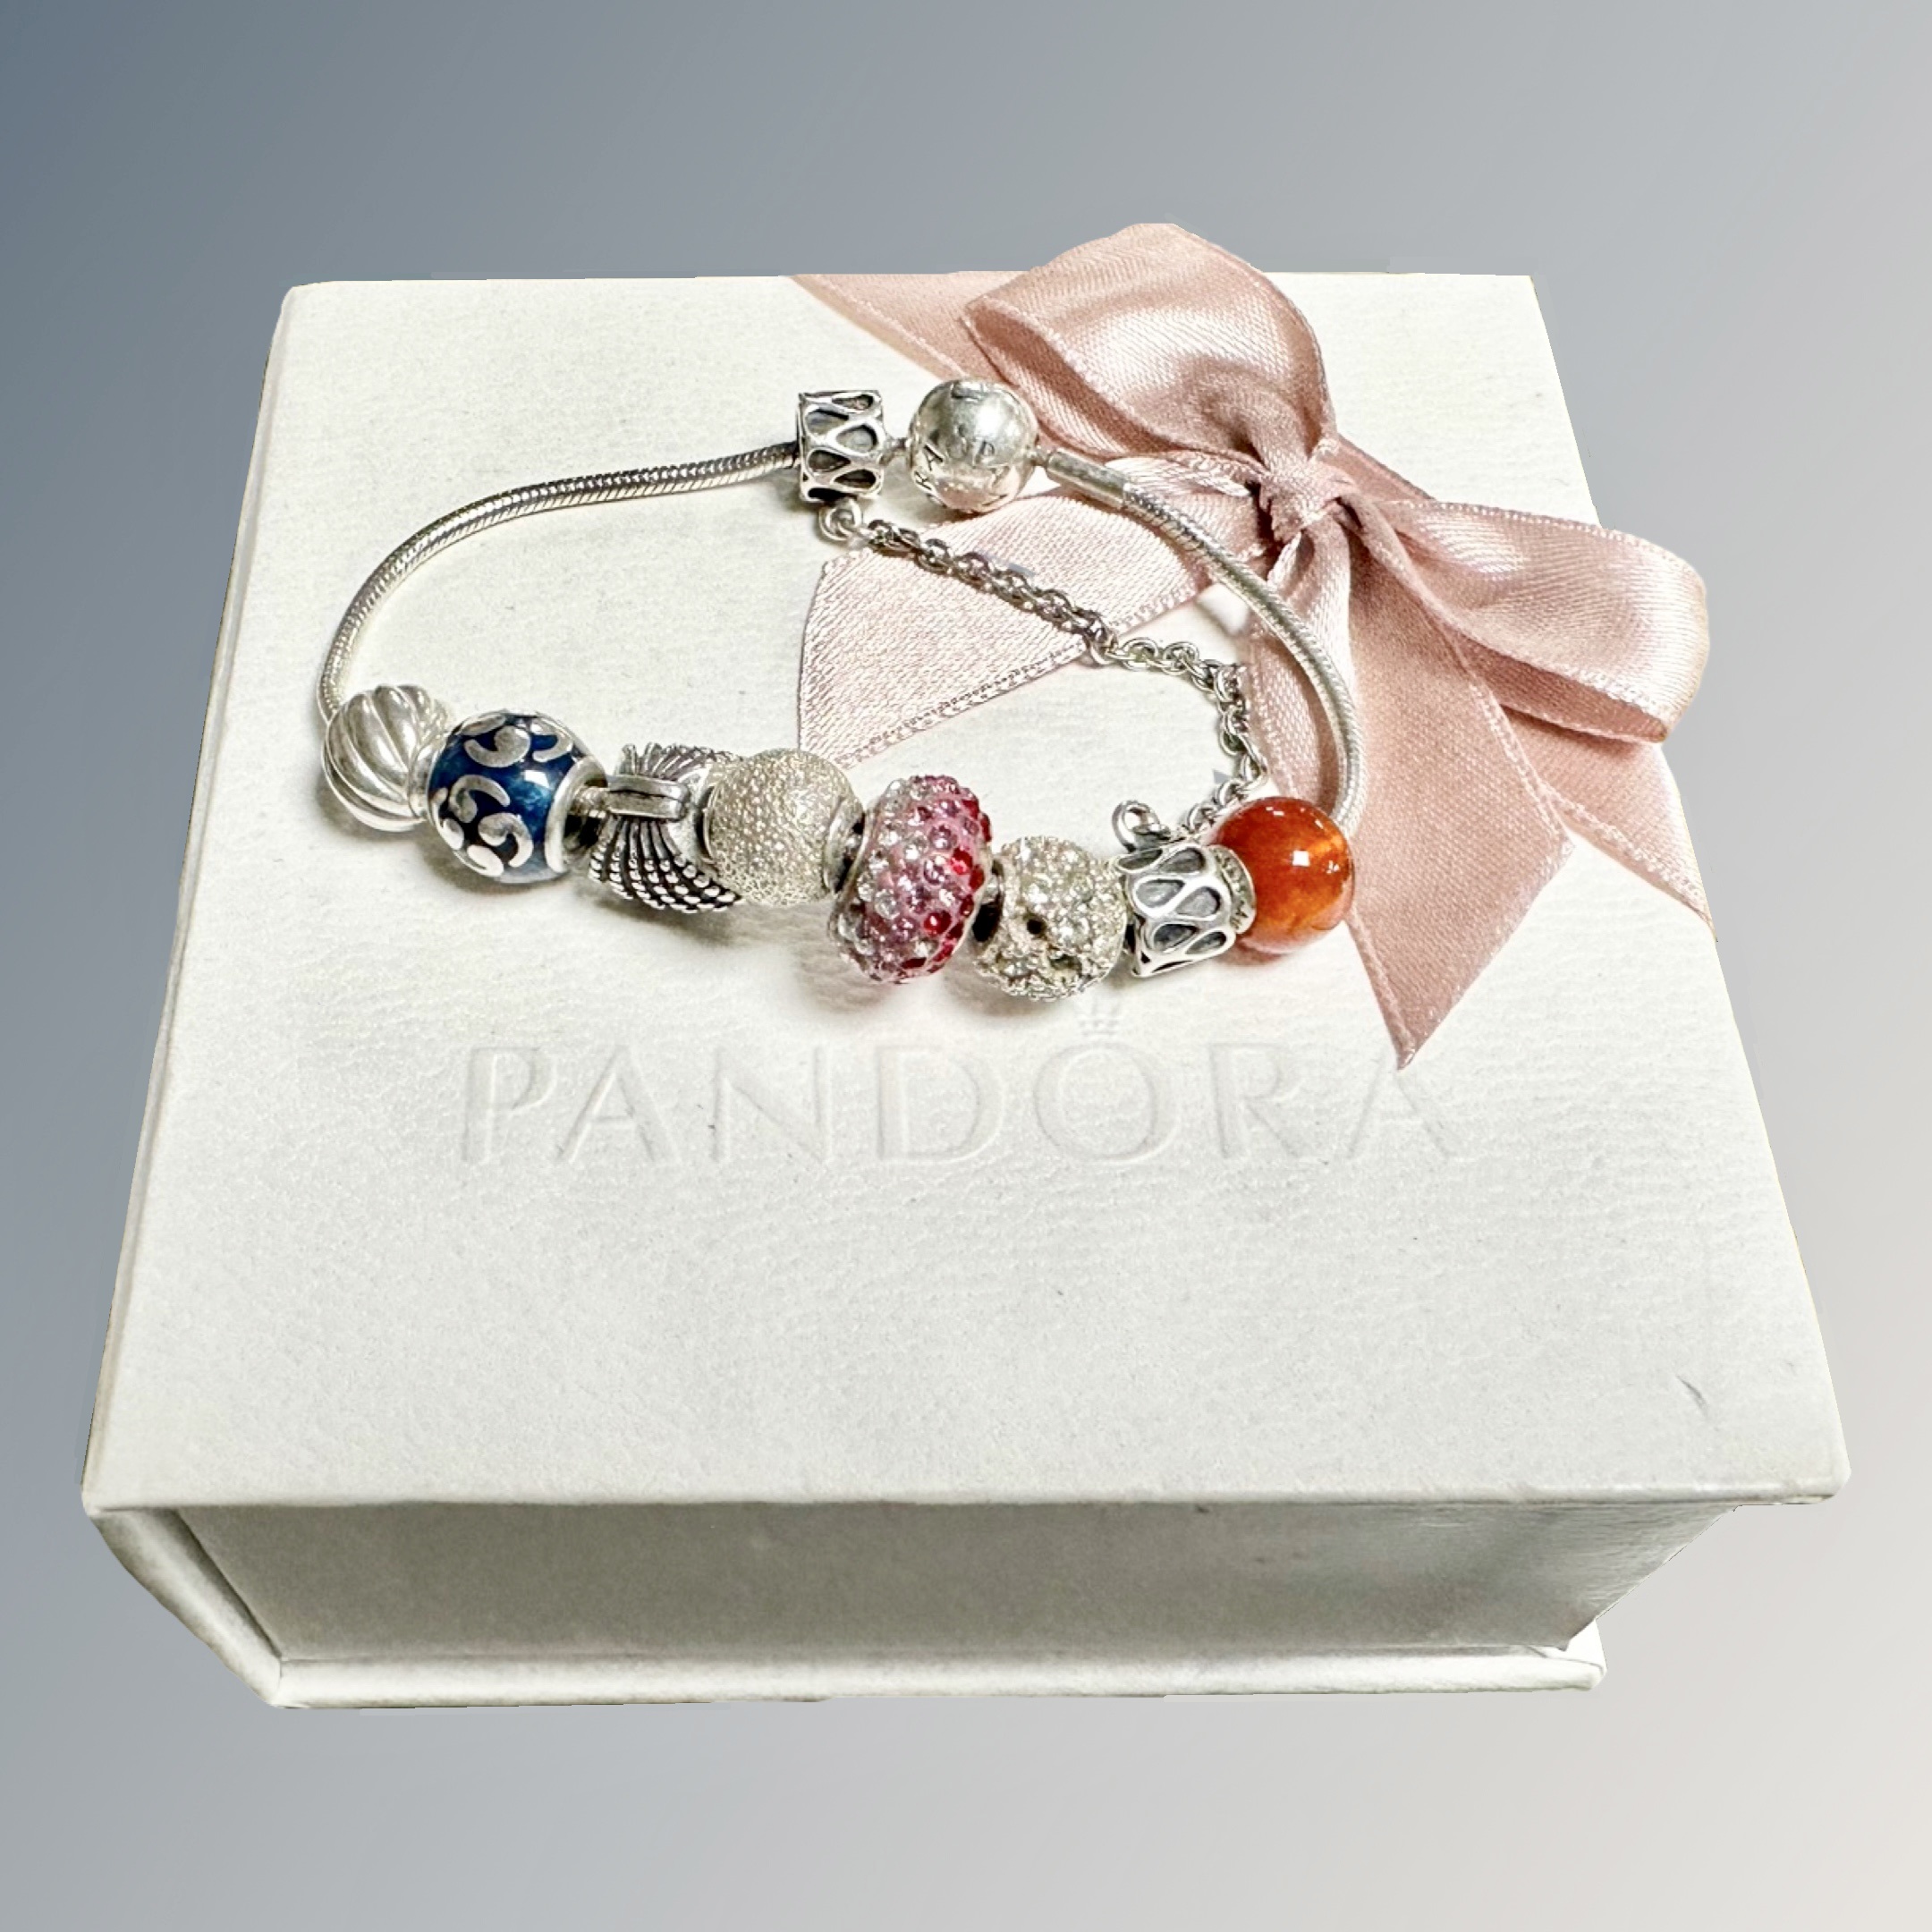 A boxed Pandora bracelet with approximately 9 beads.